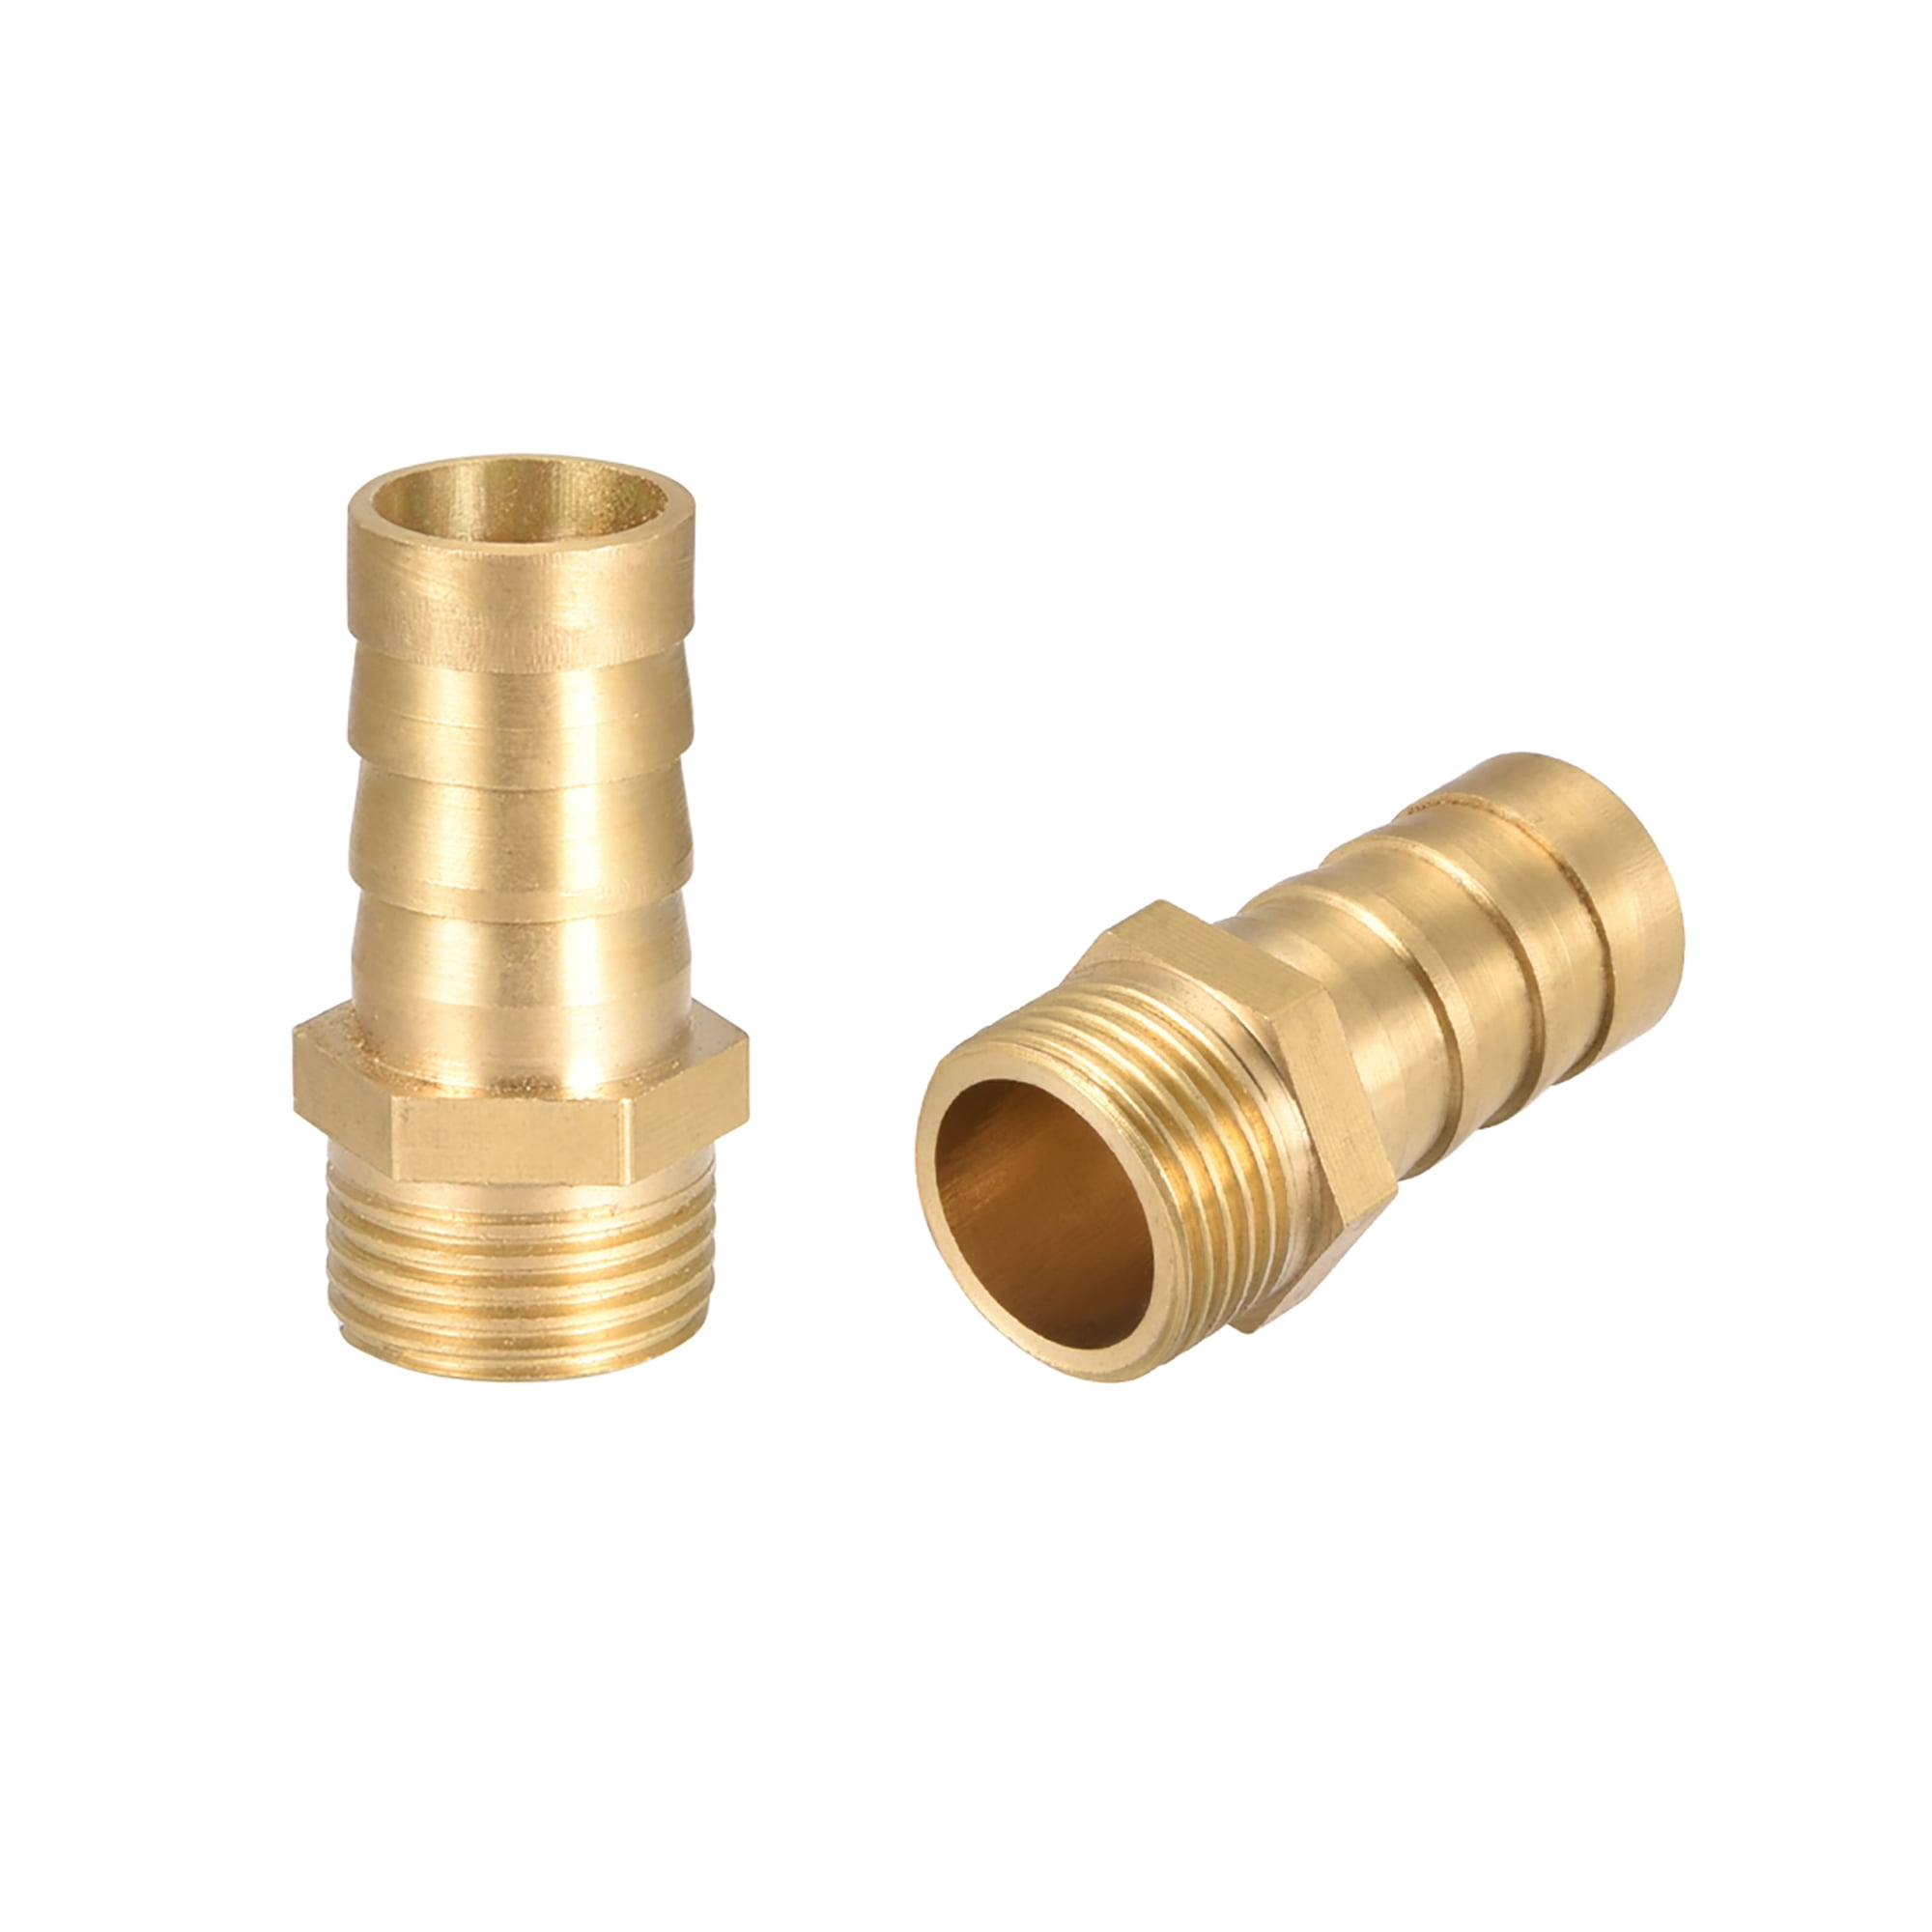 3/8" Tobacco Pipe parts & accessories - Brass 1 Small Smokeless Cap 